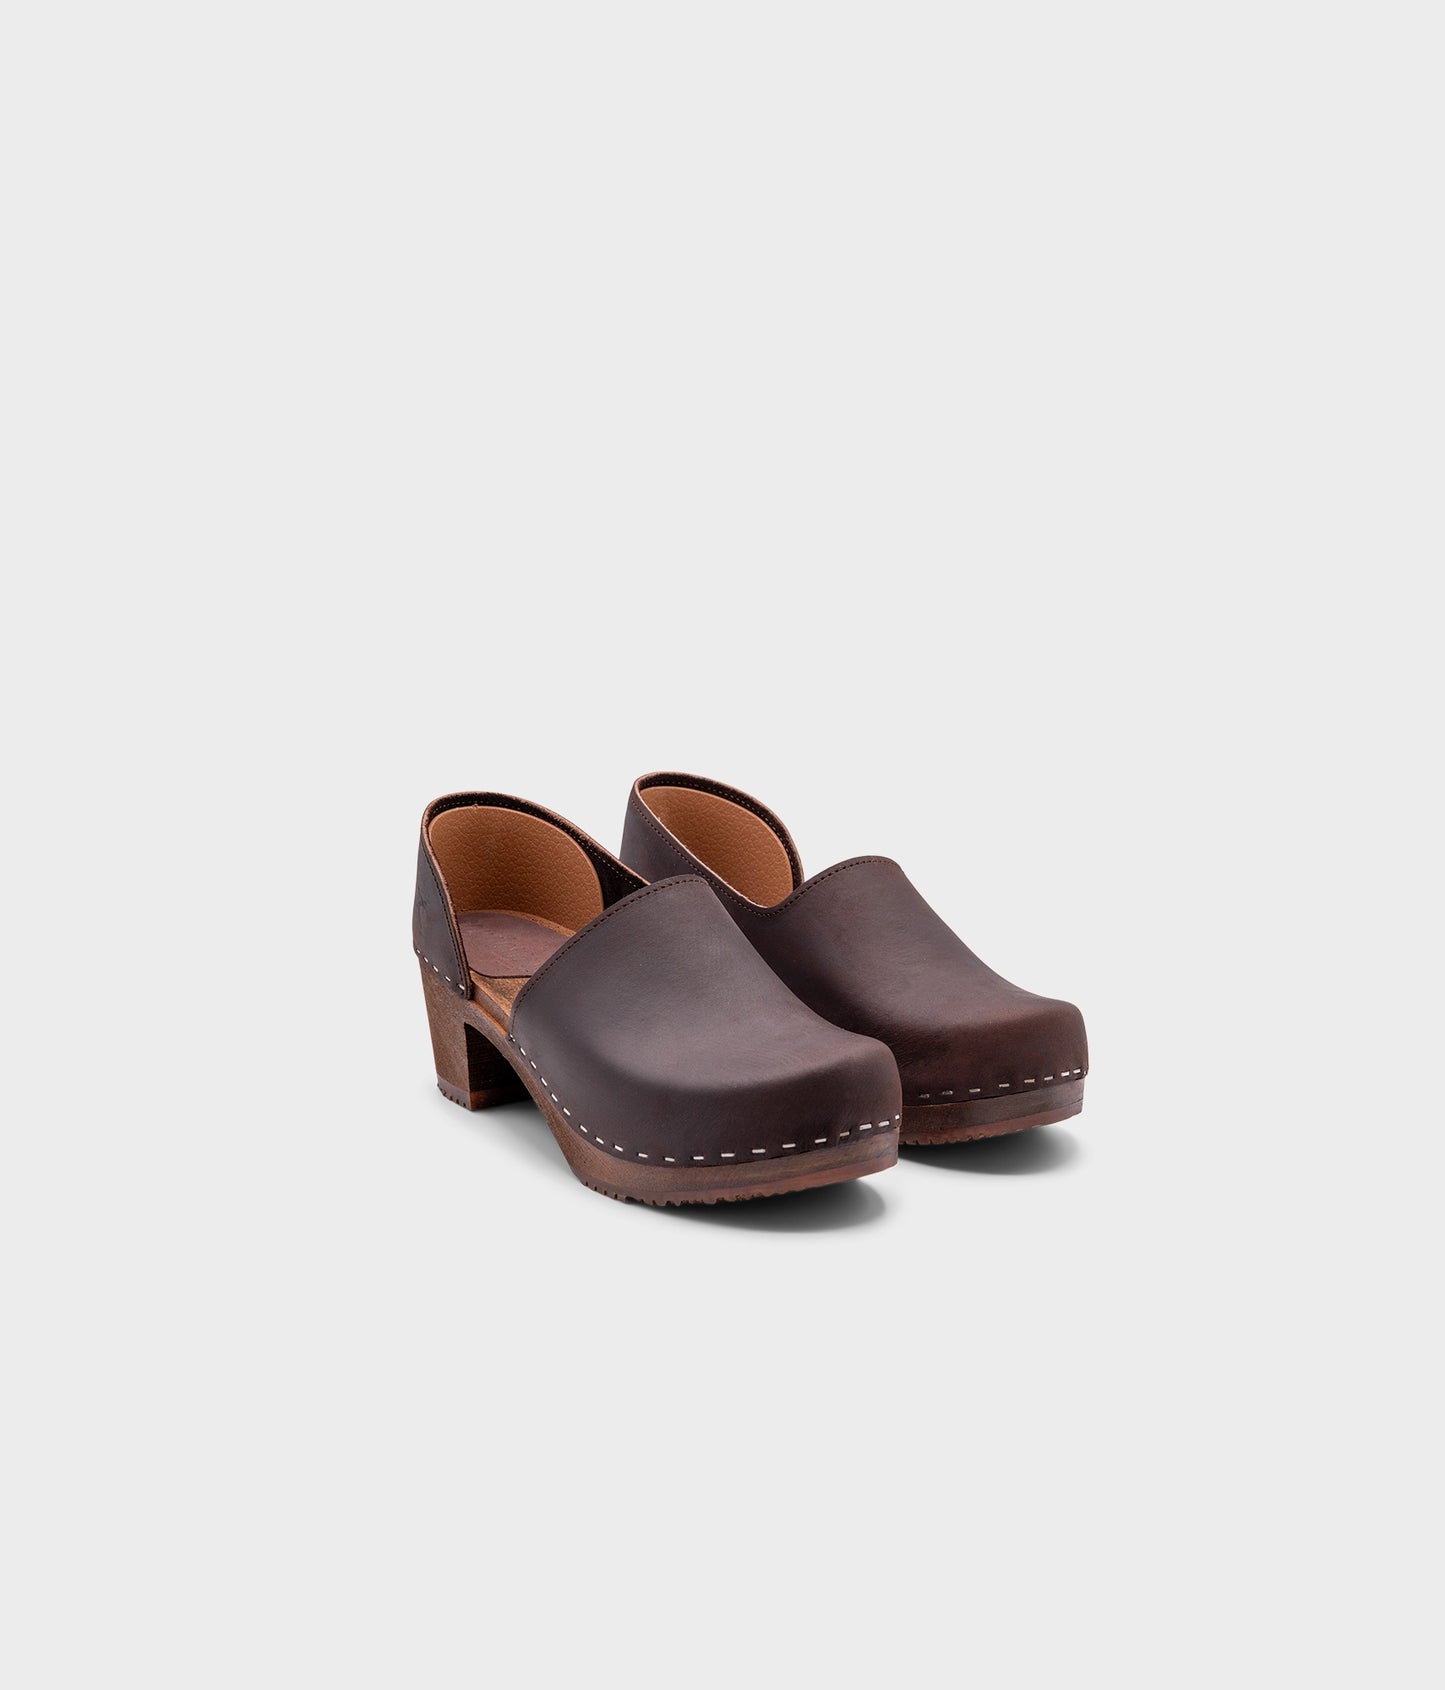 high heeled closed-back clogs in dark brown nubuck leather stapled on a dark wooden base